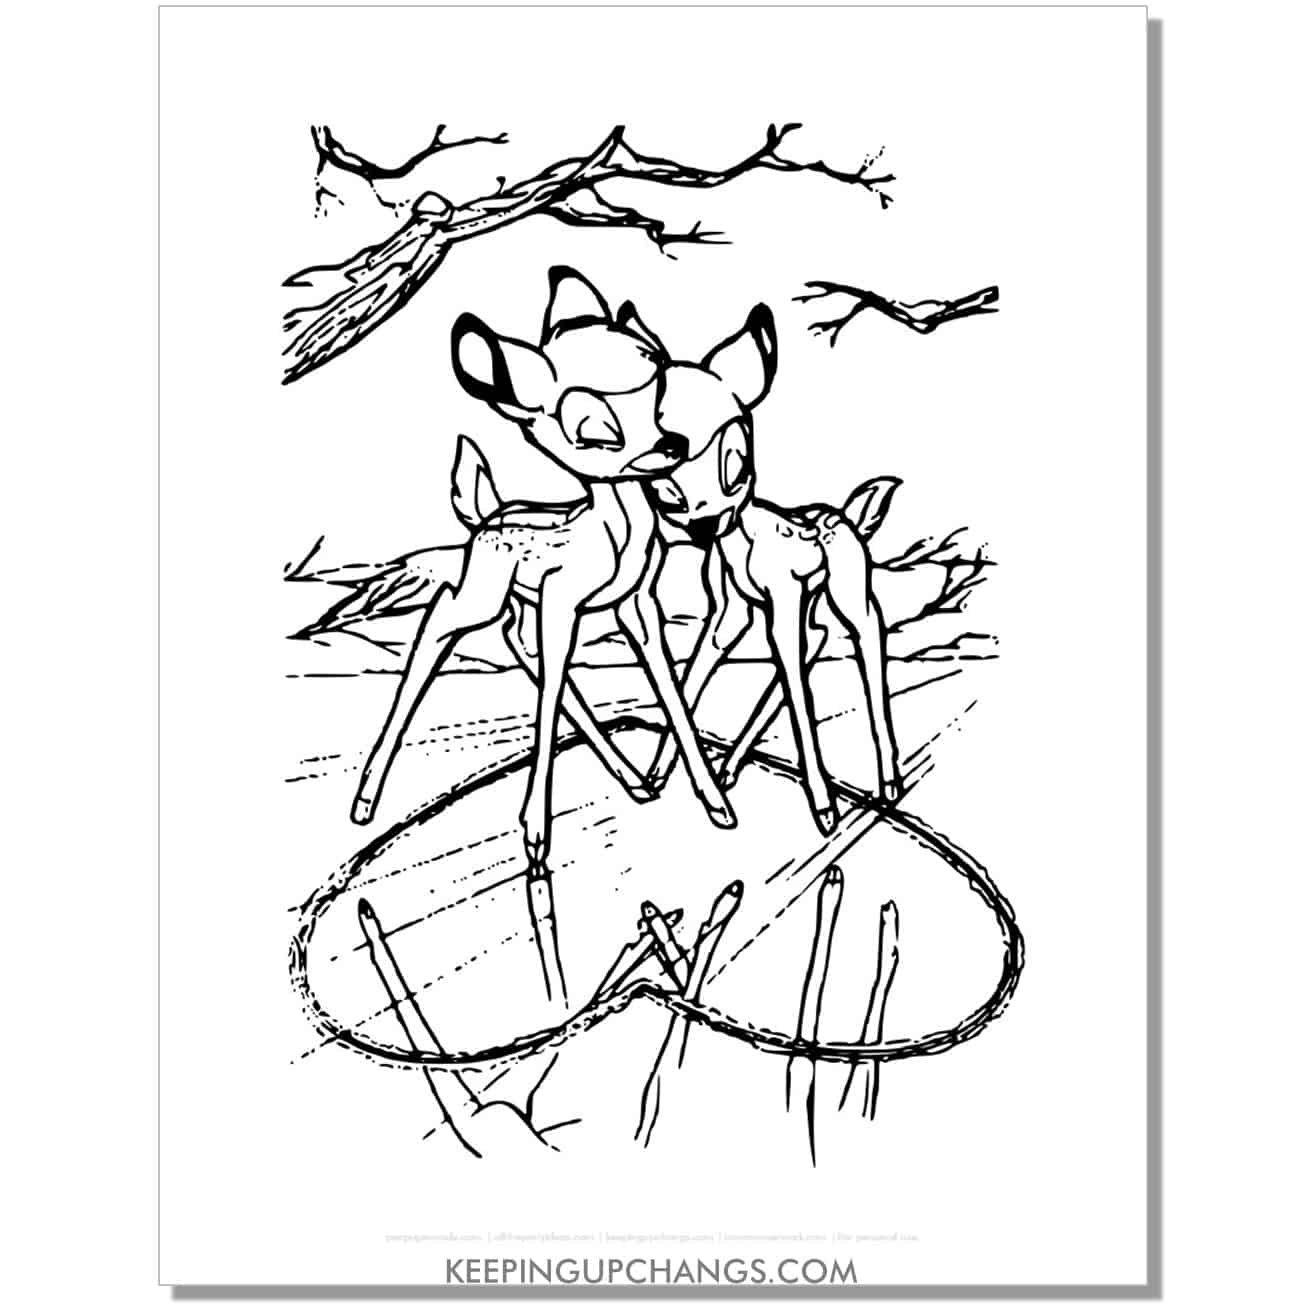 free faline and bambi with heart in the ice coloring page, sheet.